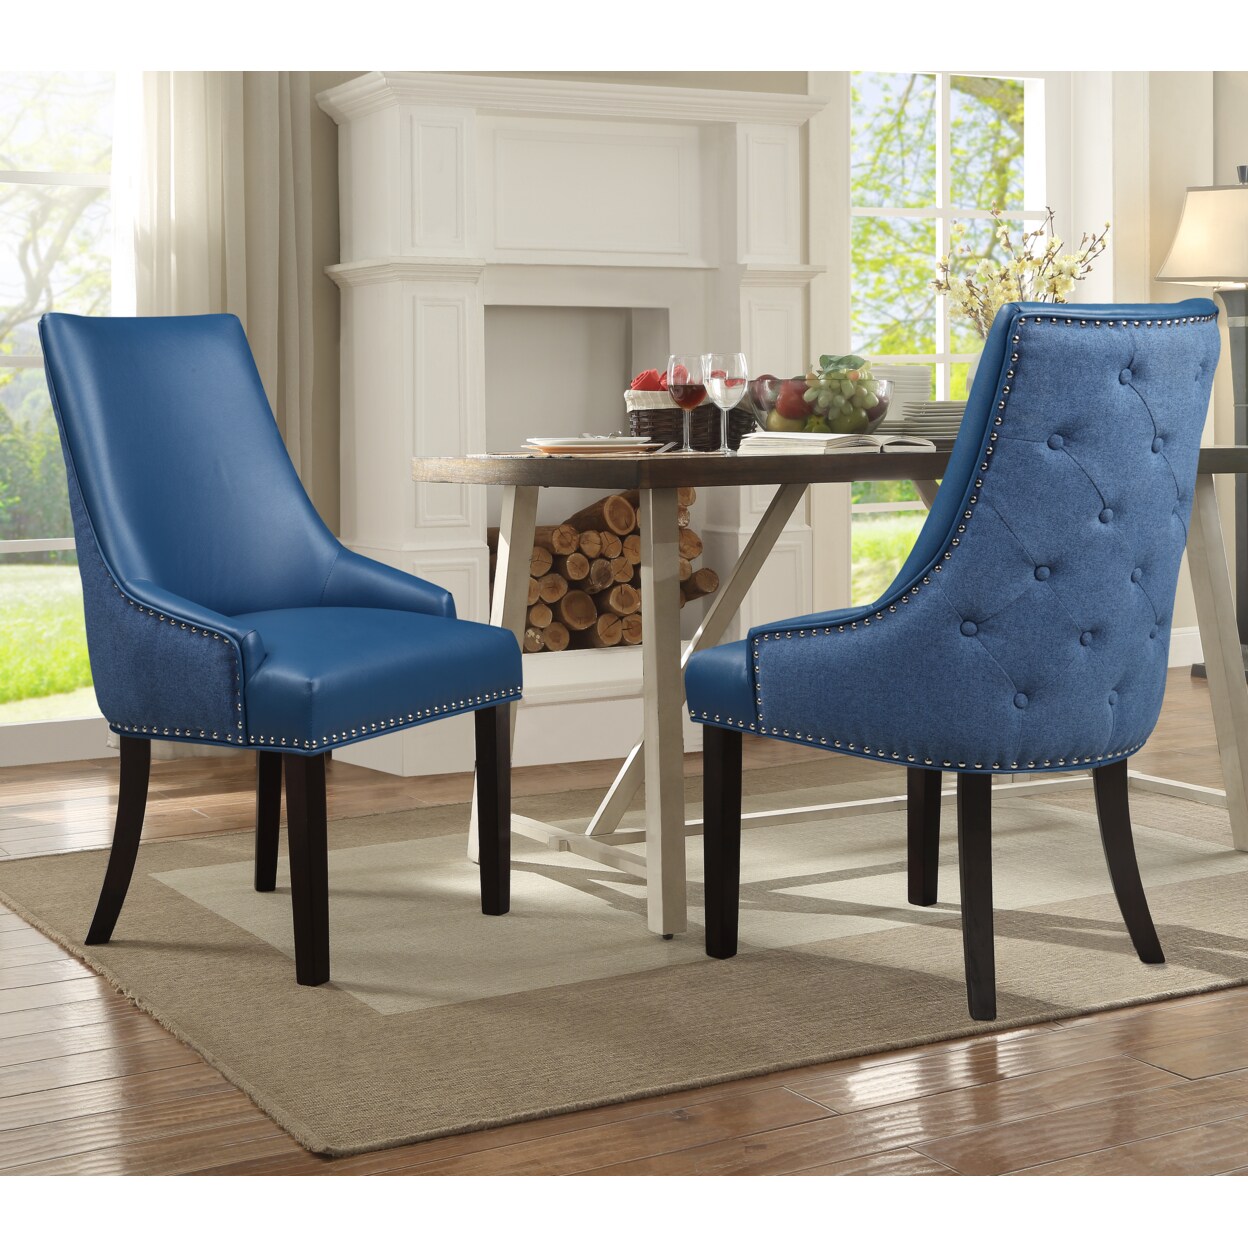 Iconic Home Taylor PU Leather Dining Chair Set of 2 Linen Button Tufted with Silver Nailhead Solid Birch Legs